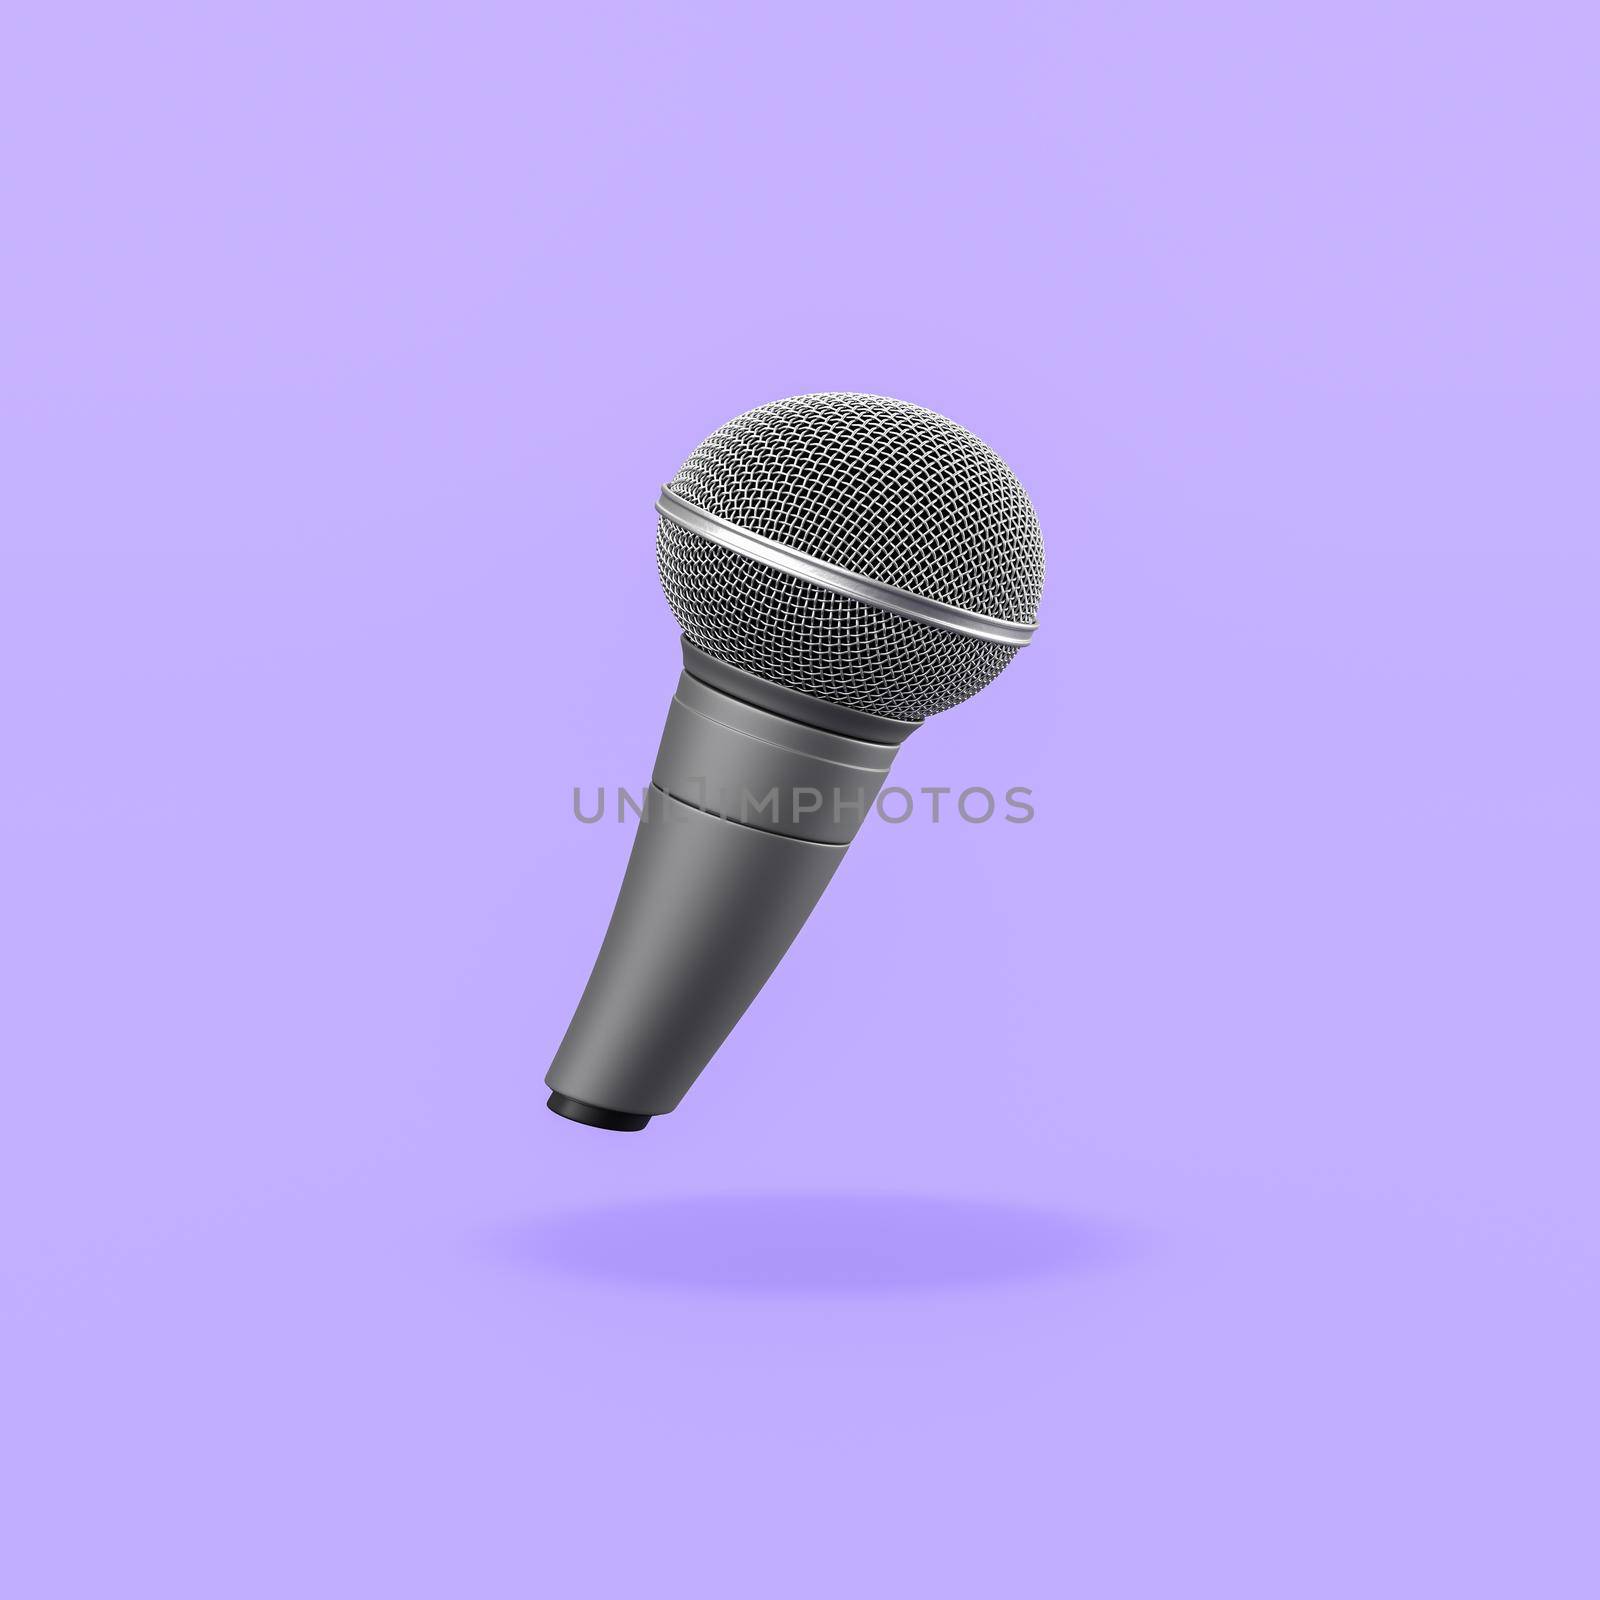 Funny Metallic Microphone on Flat Purple Background with Shadow 3D Illustration